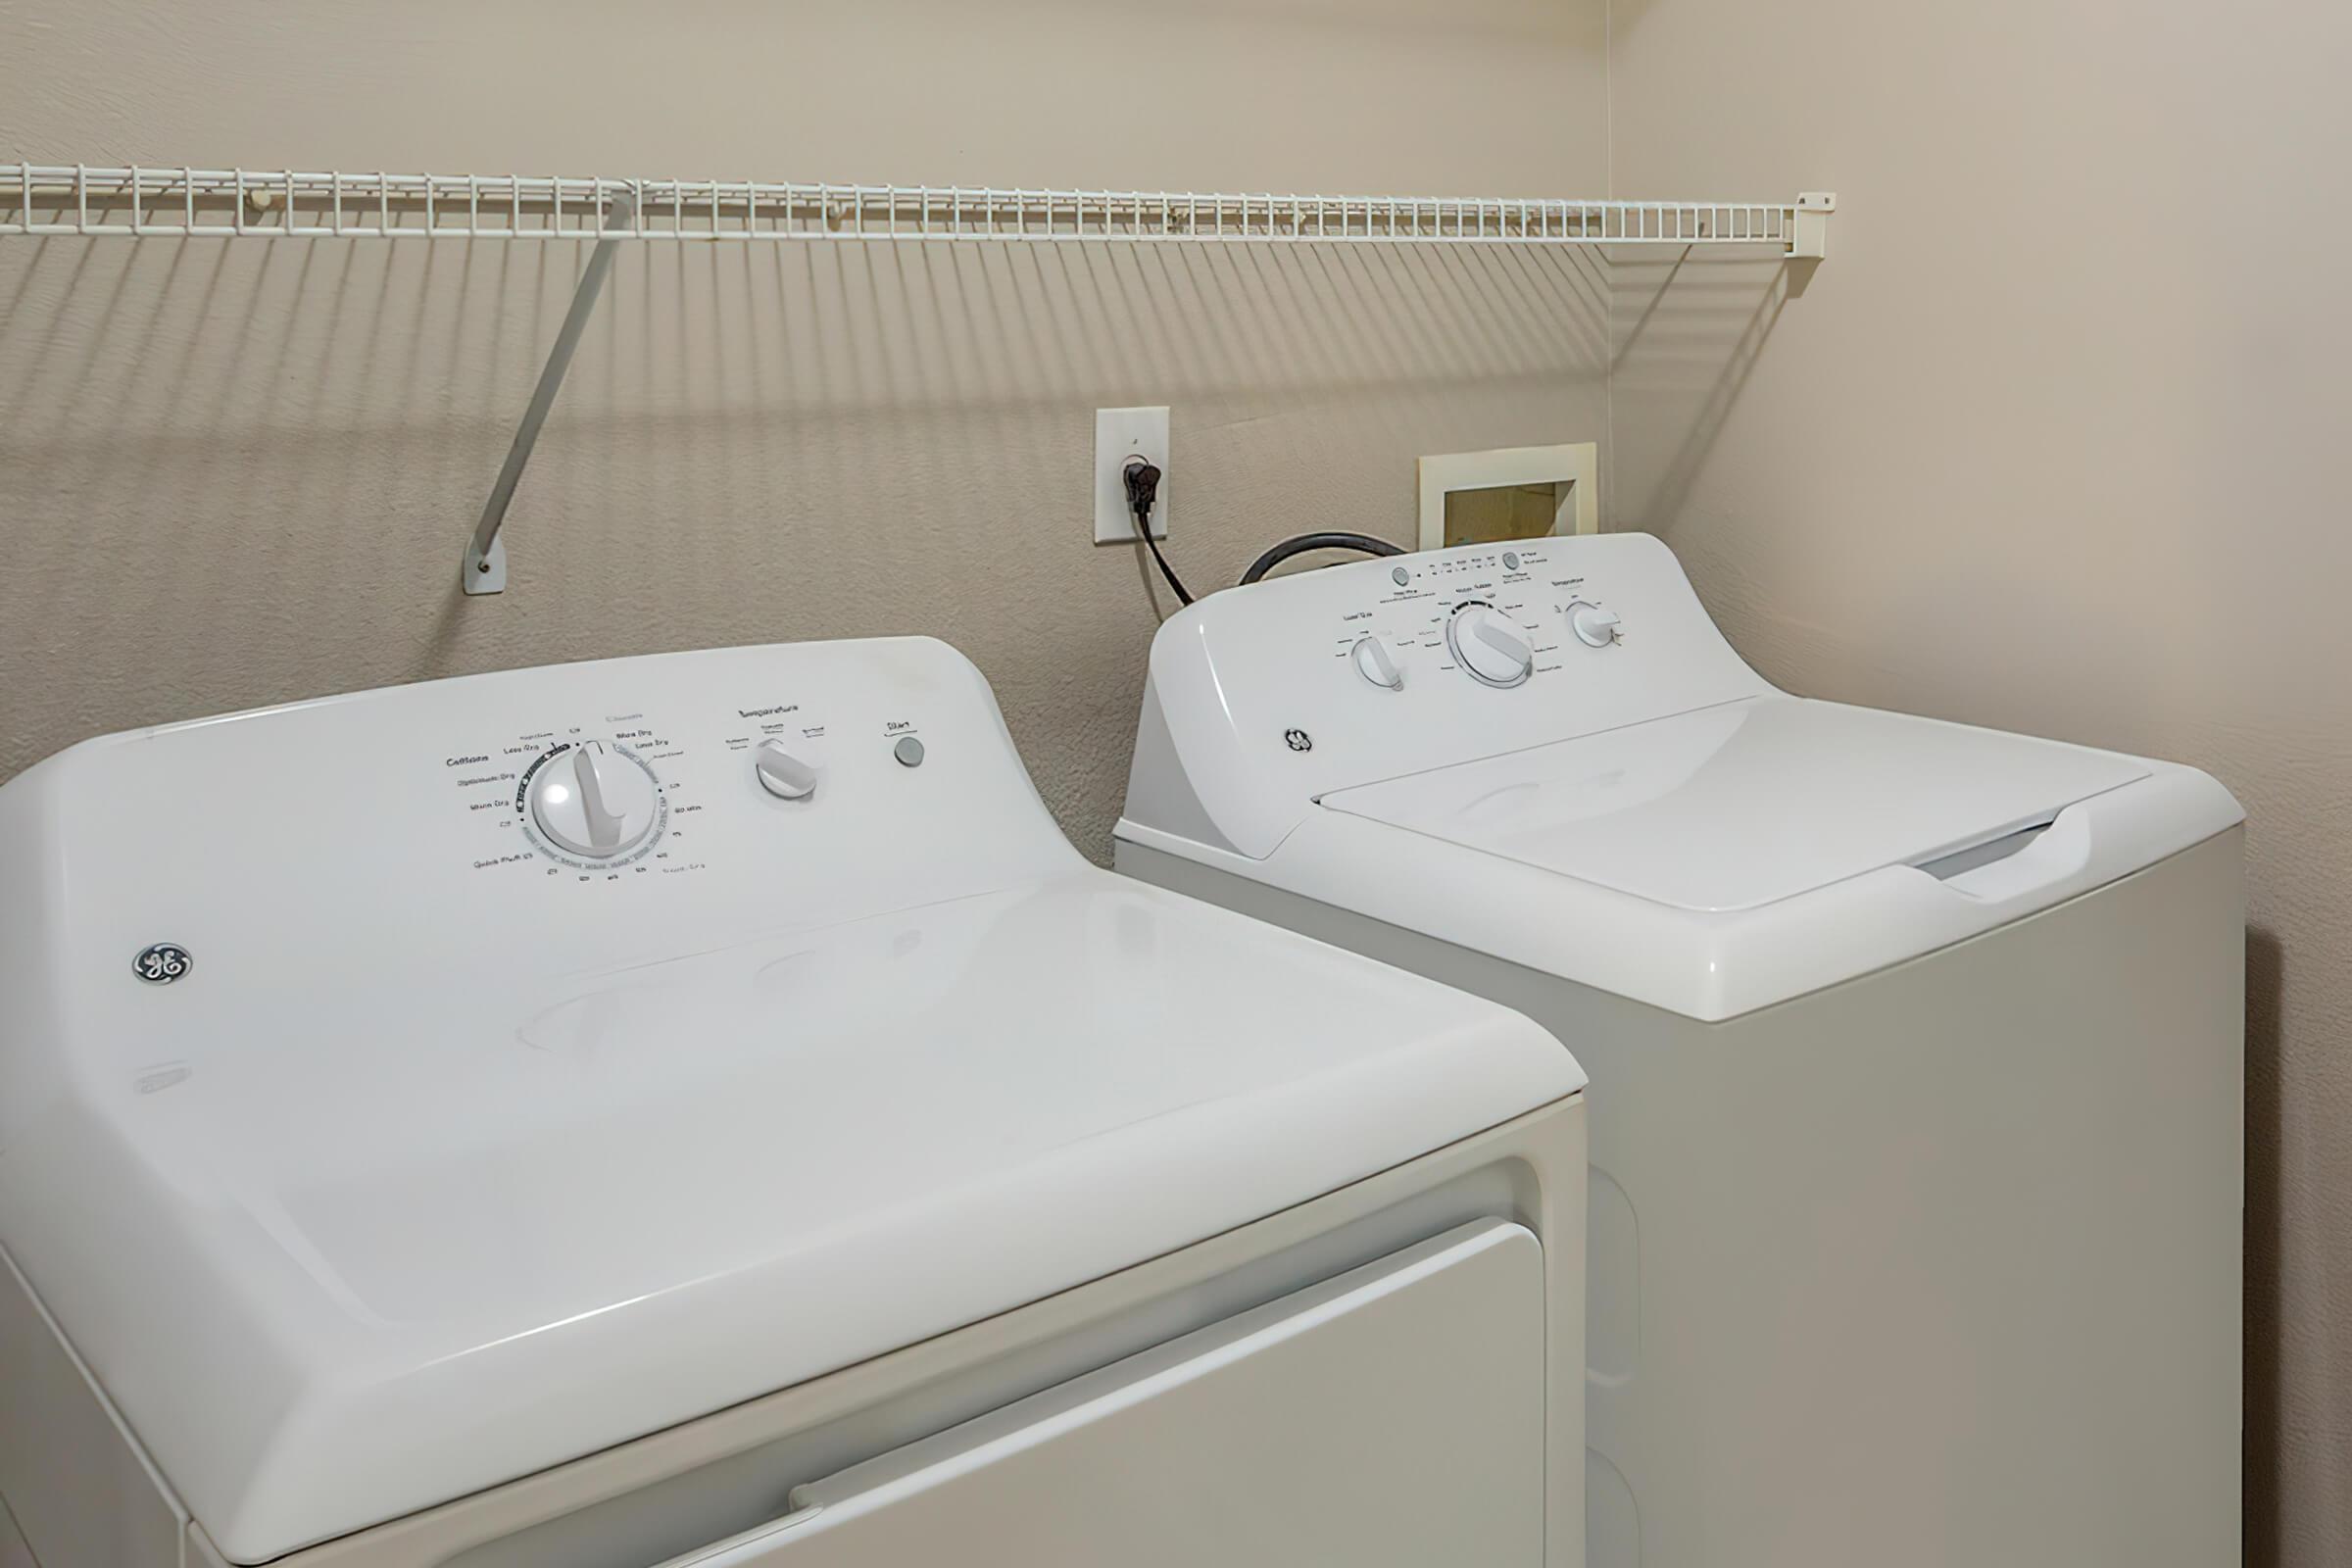 EASY ACCESS LAUNDRY AREA WITH CONNECTIONS